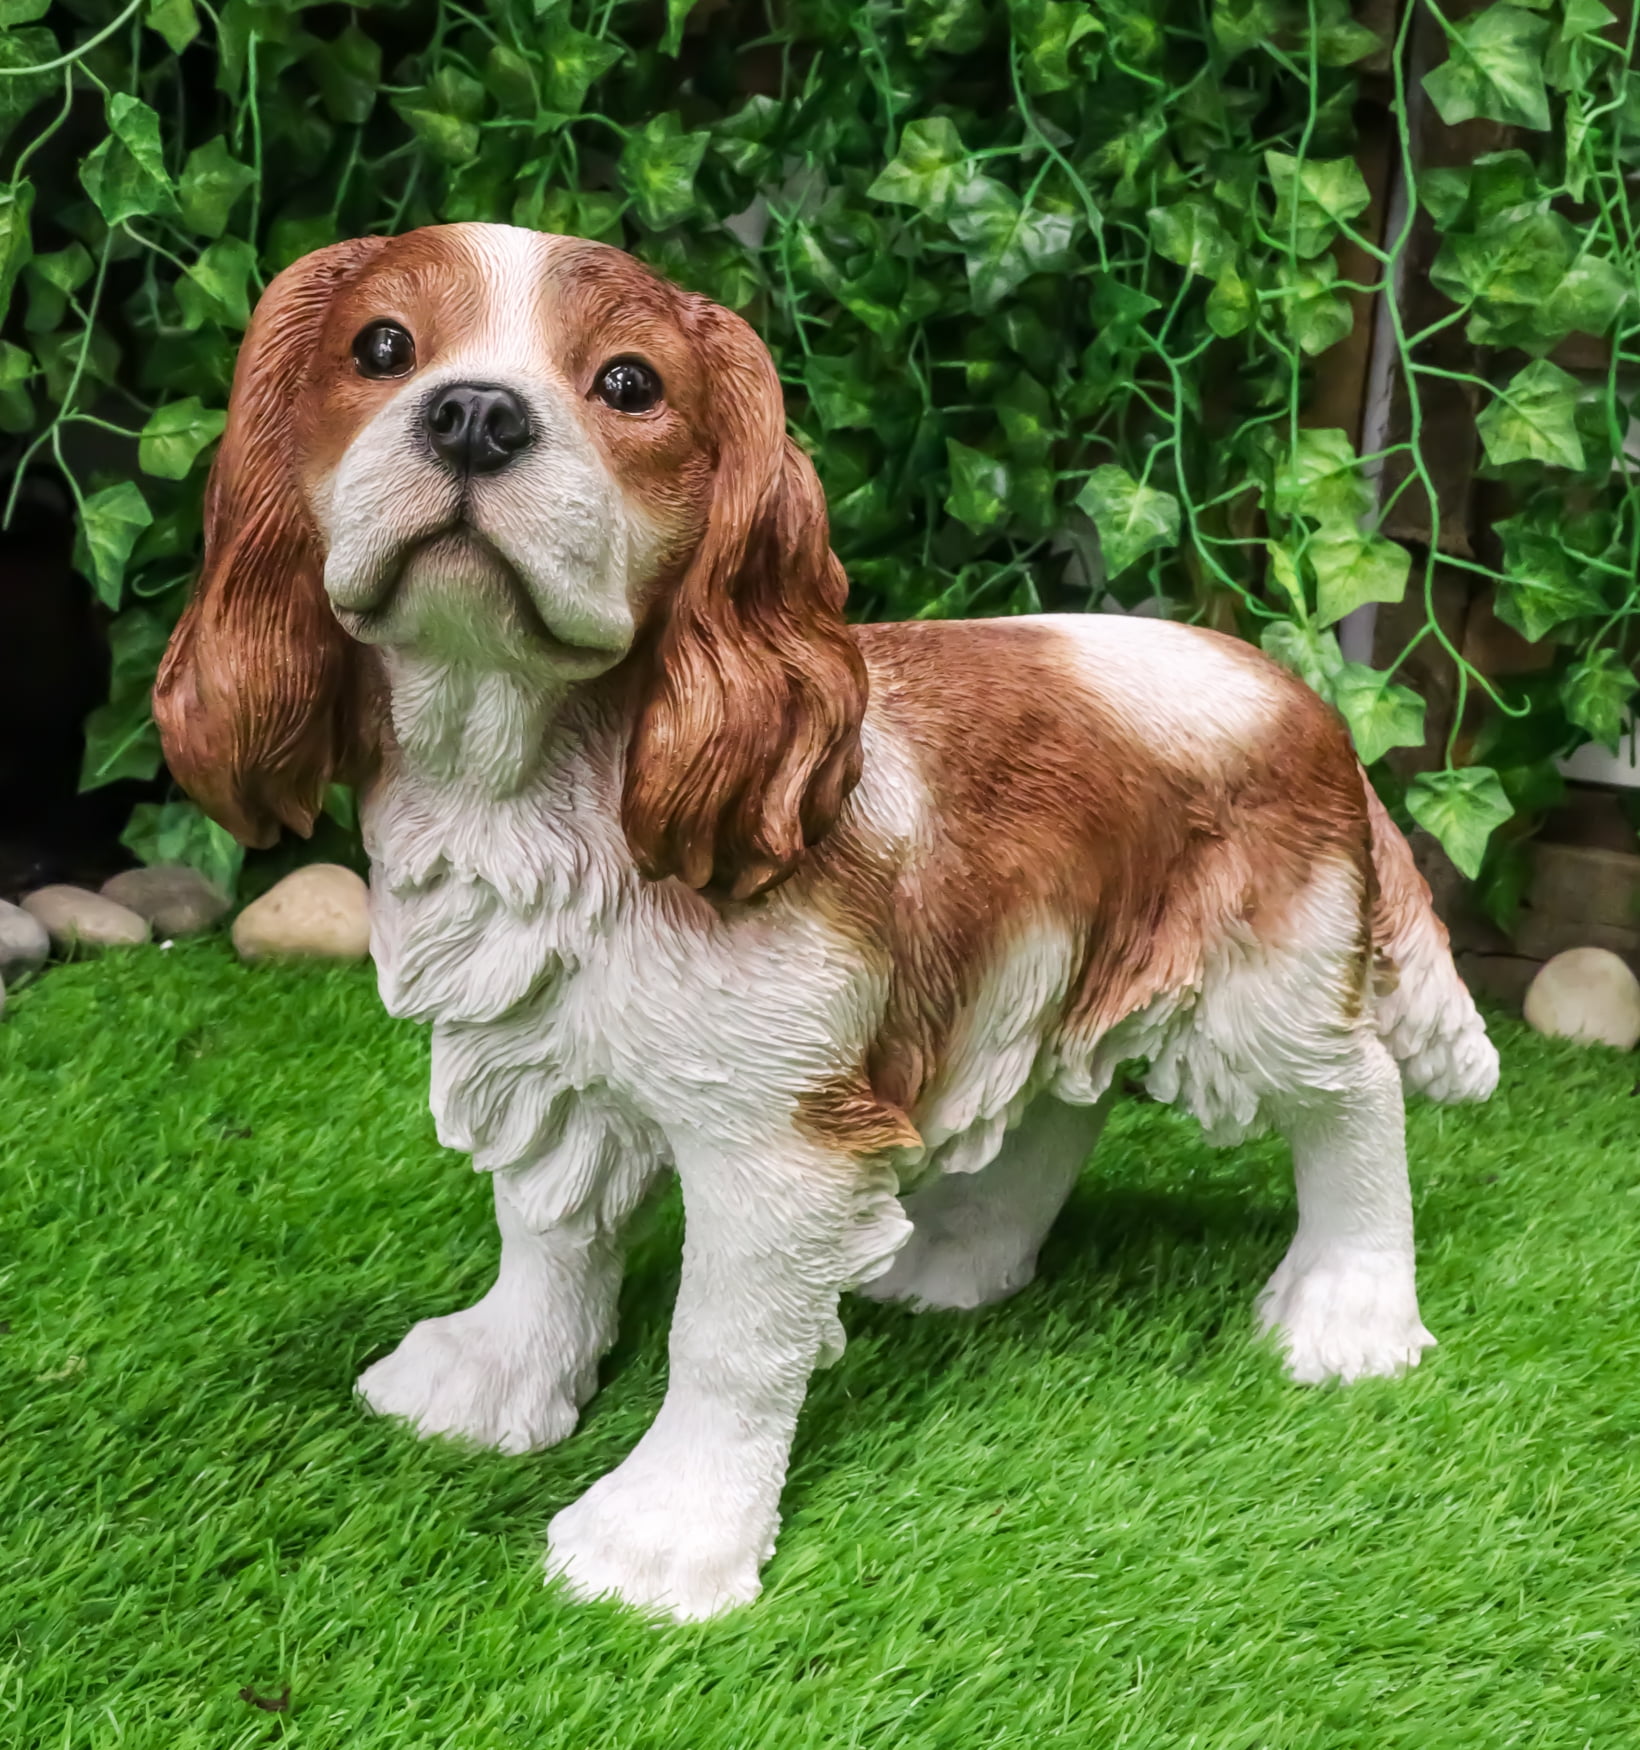 Life Like Figurine Statue Home/ Garden NEW Sitting KING CHARLES Puppy Dog 